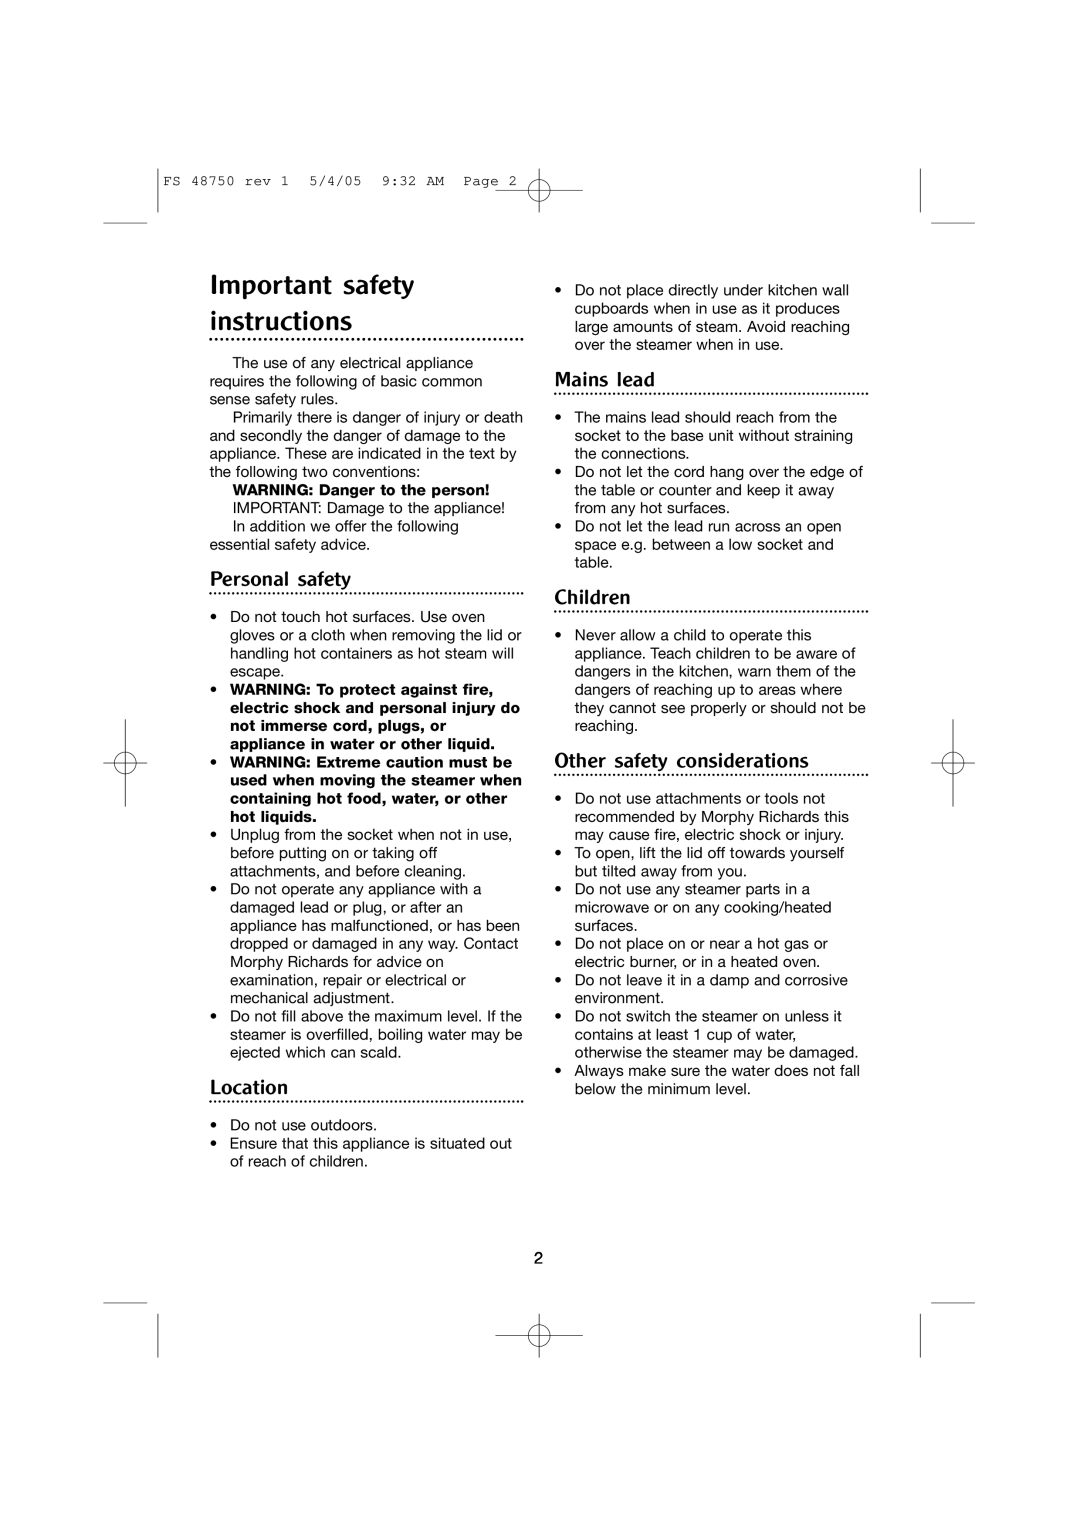 Morphy Richards FS 48750 manual Important safety instructions, Personal safety, Location, Mains lead, Children 